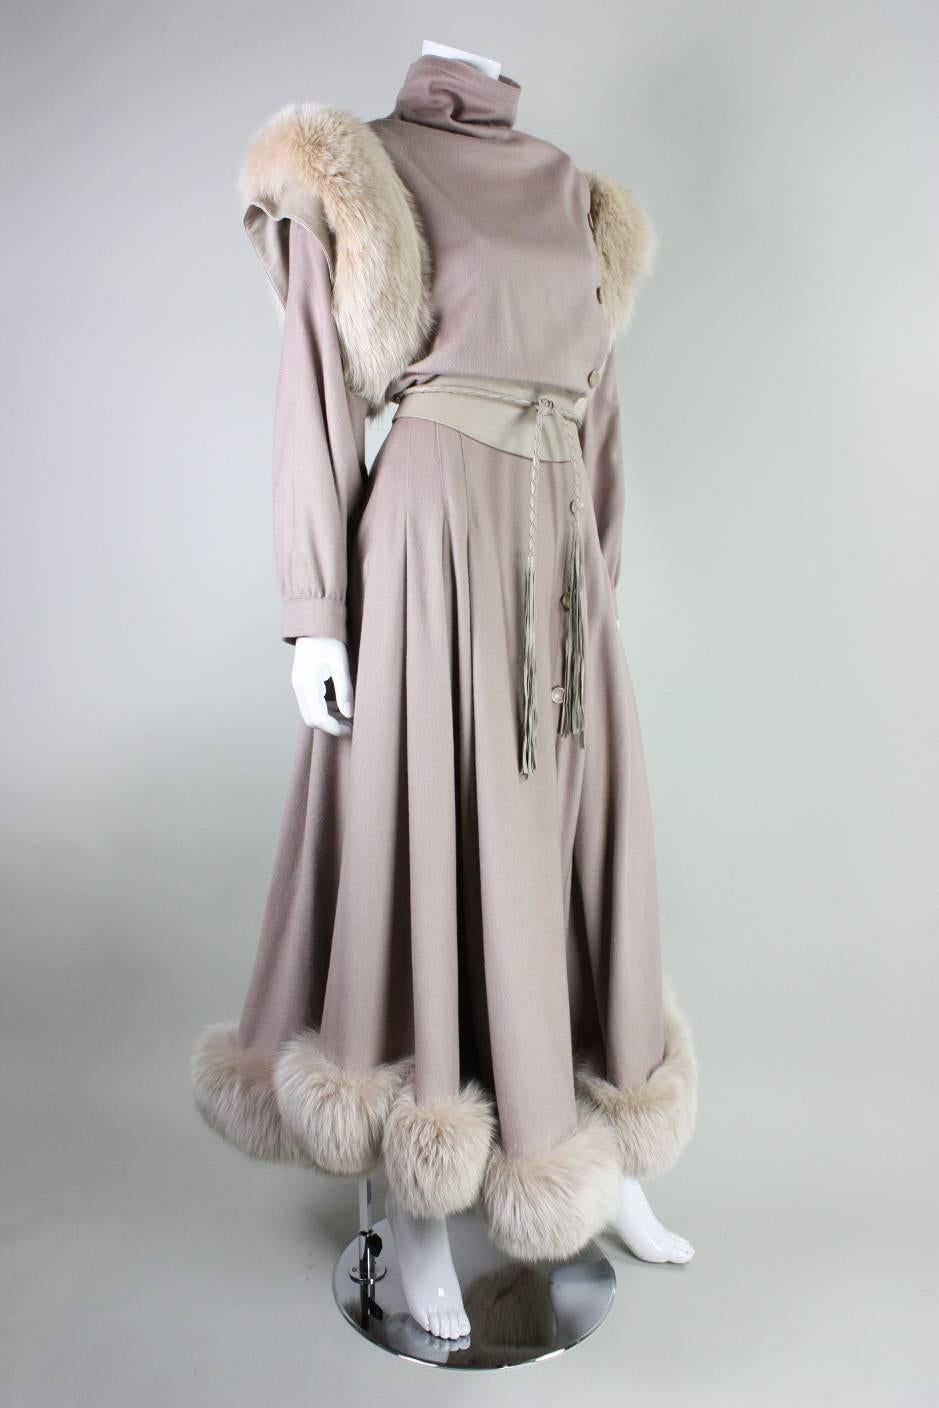 Vintage dress from Bernard Perris dates to the 1980's and is made of taupe wool with cream fox fur trim around shoulders and at hem.  Asymmetrical button closure.  Full skirt.  Lightly padded shoulders.  Detached leather sash with braided